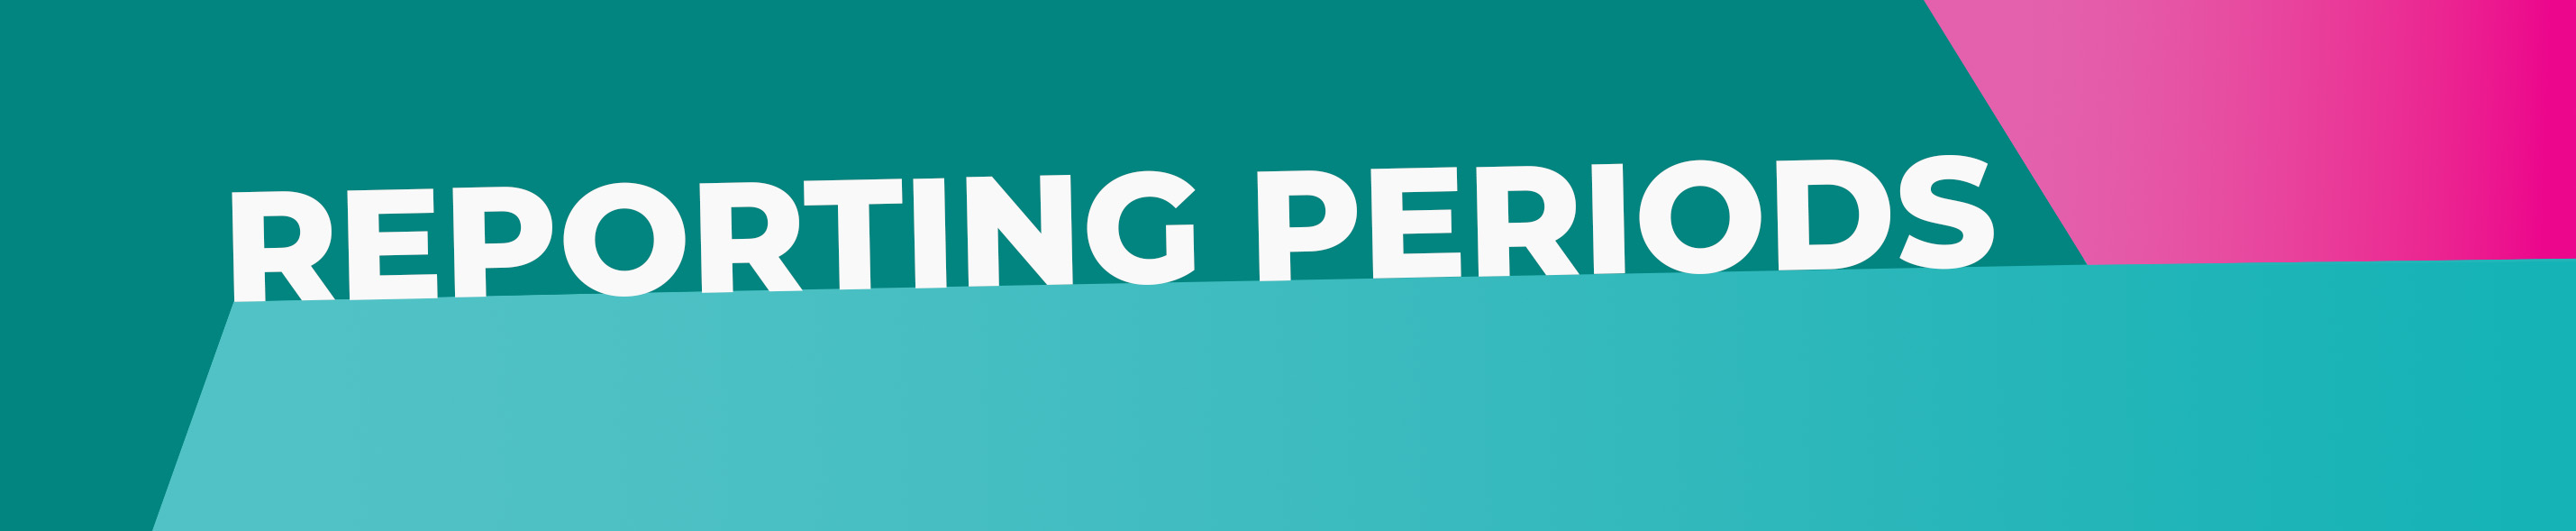 Campaign Finance Reporting Periods Banner